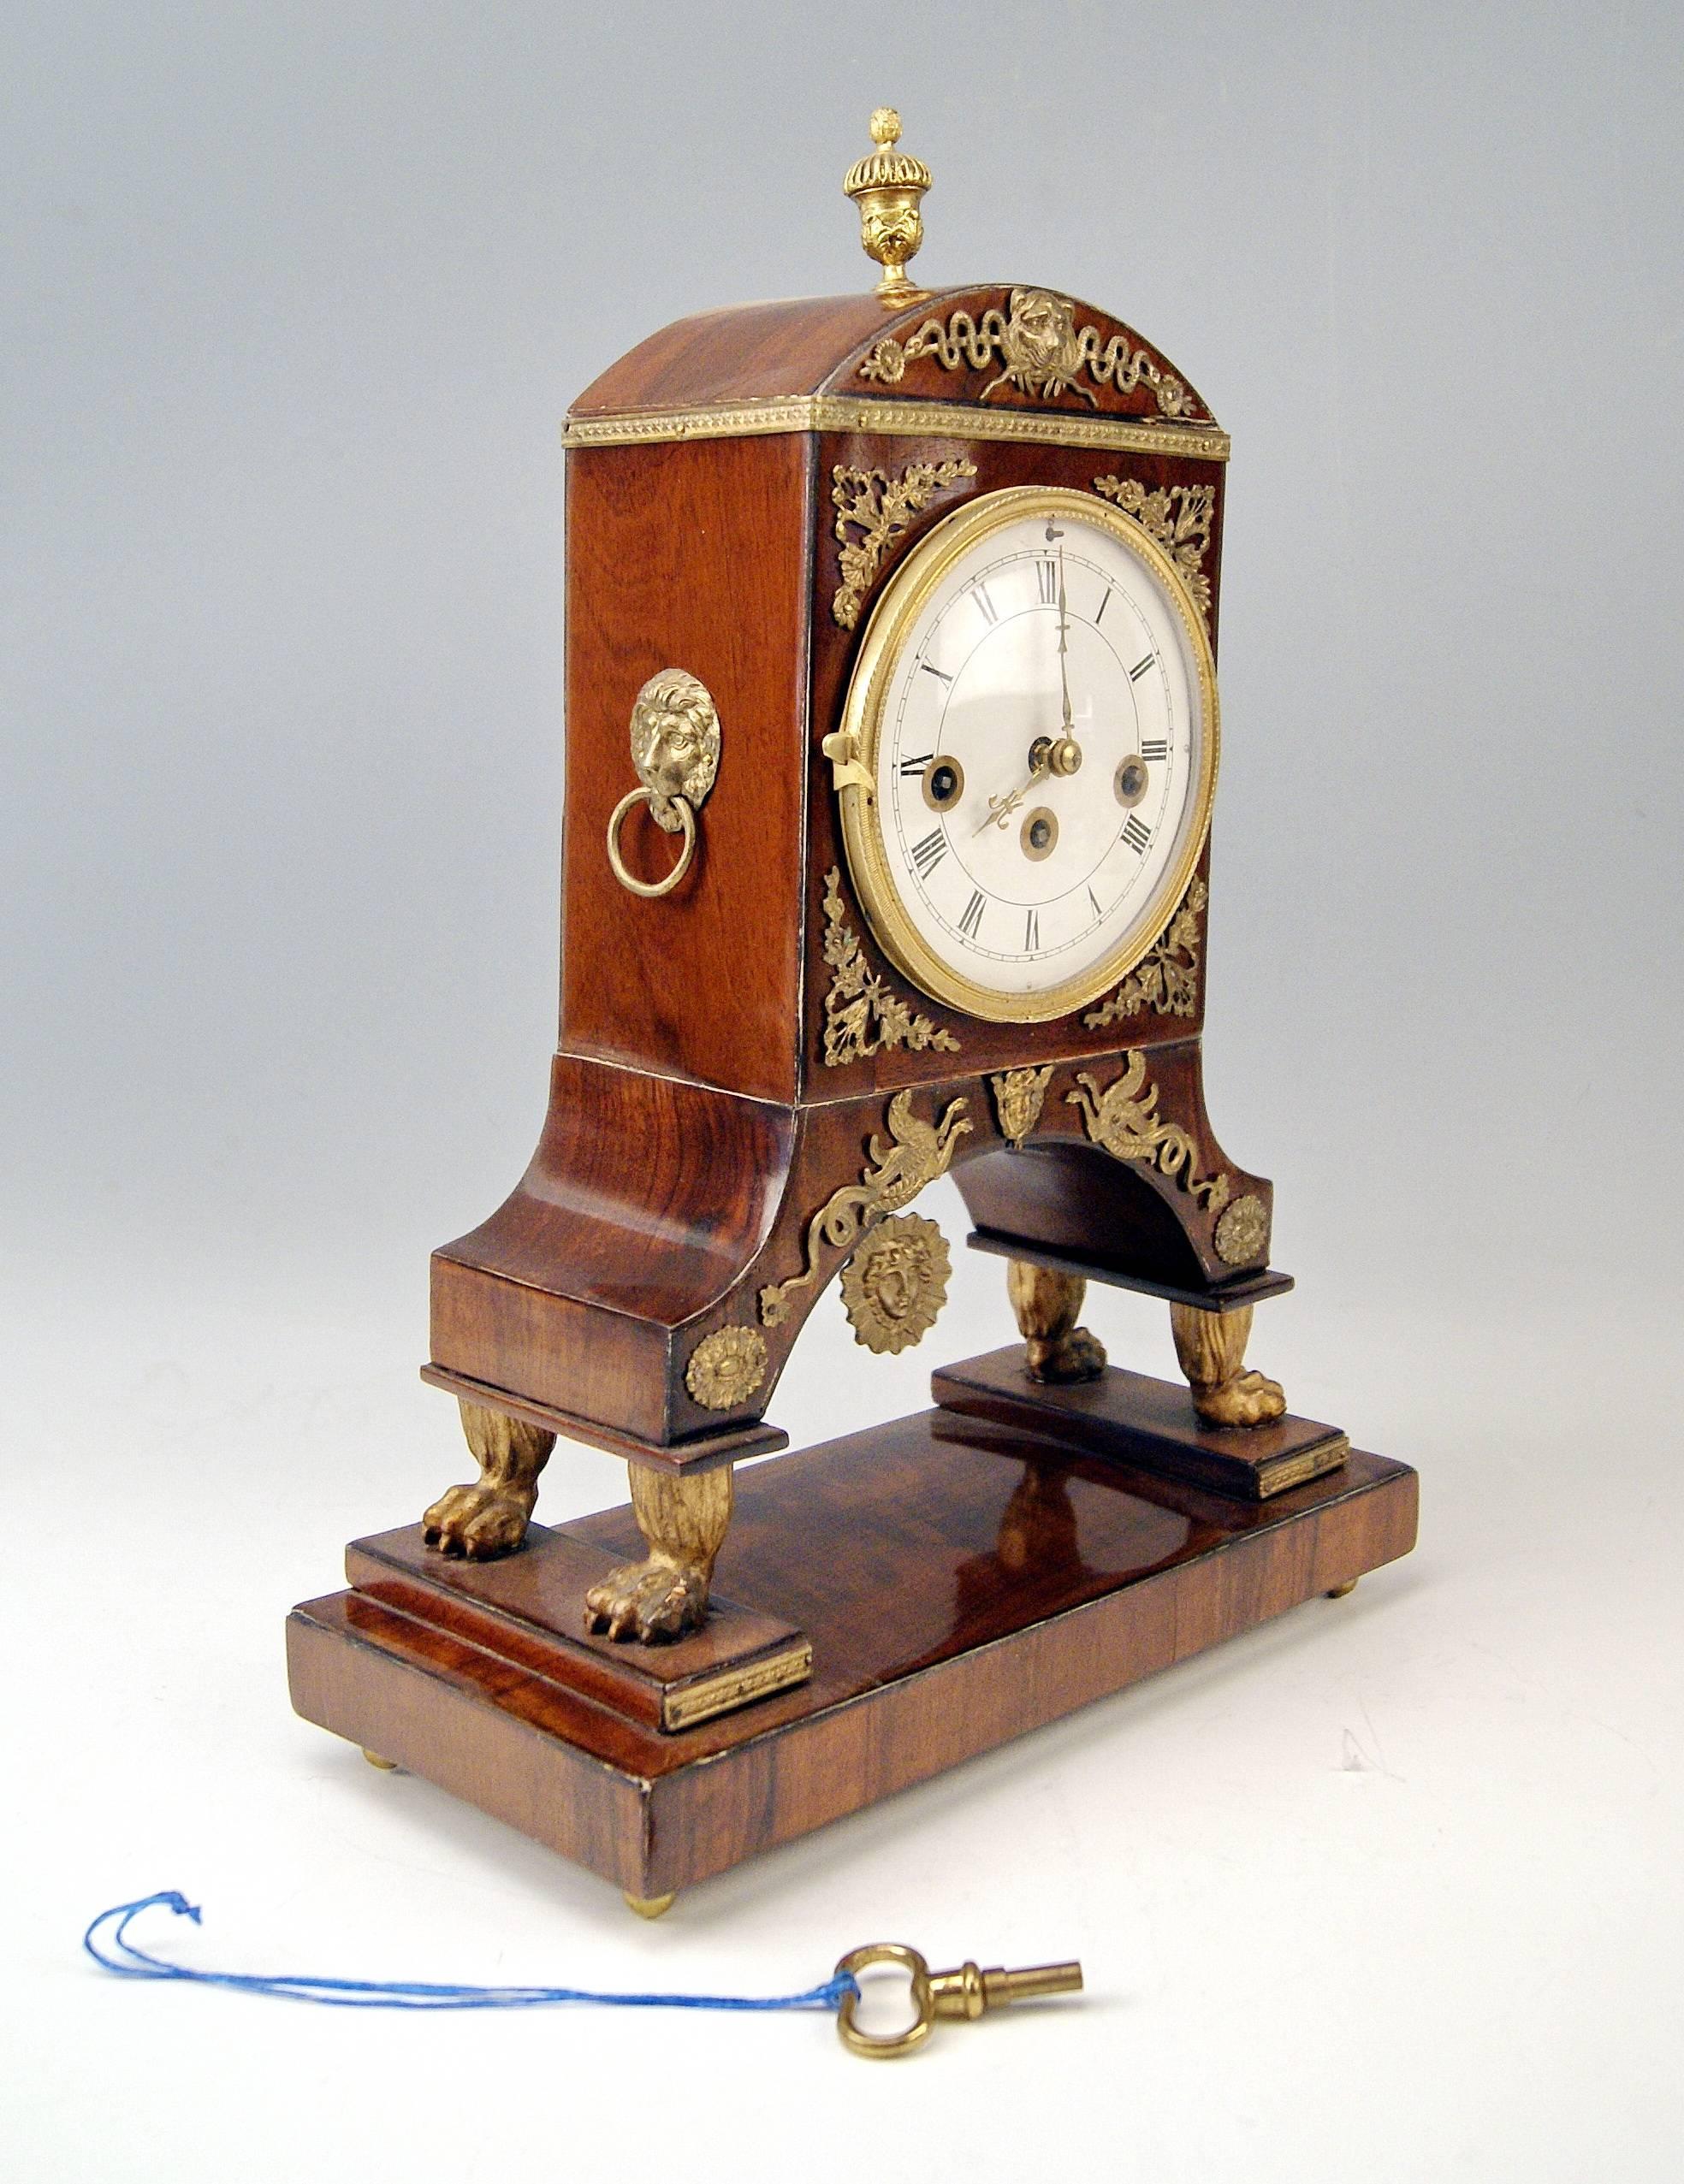 Subject:
Viennese gorgeous mantel/mantle/table chiming clock, main parts made of wood. Explanation: Mantel clocks or shelf clocks are house clocks traditionally placed on the shelf, or mantel, above the fireplace.

Manufactory: Viennese